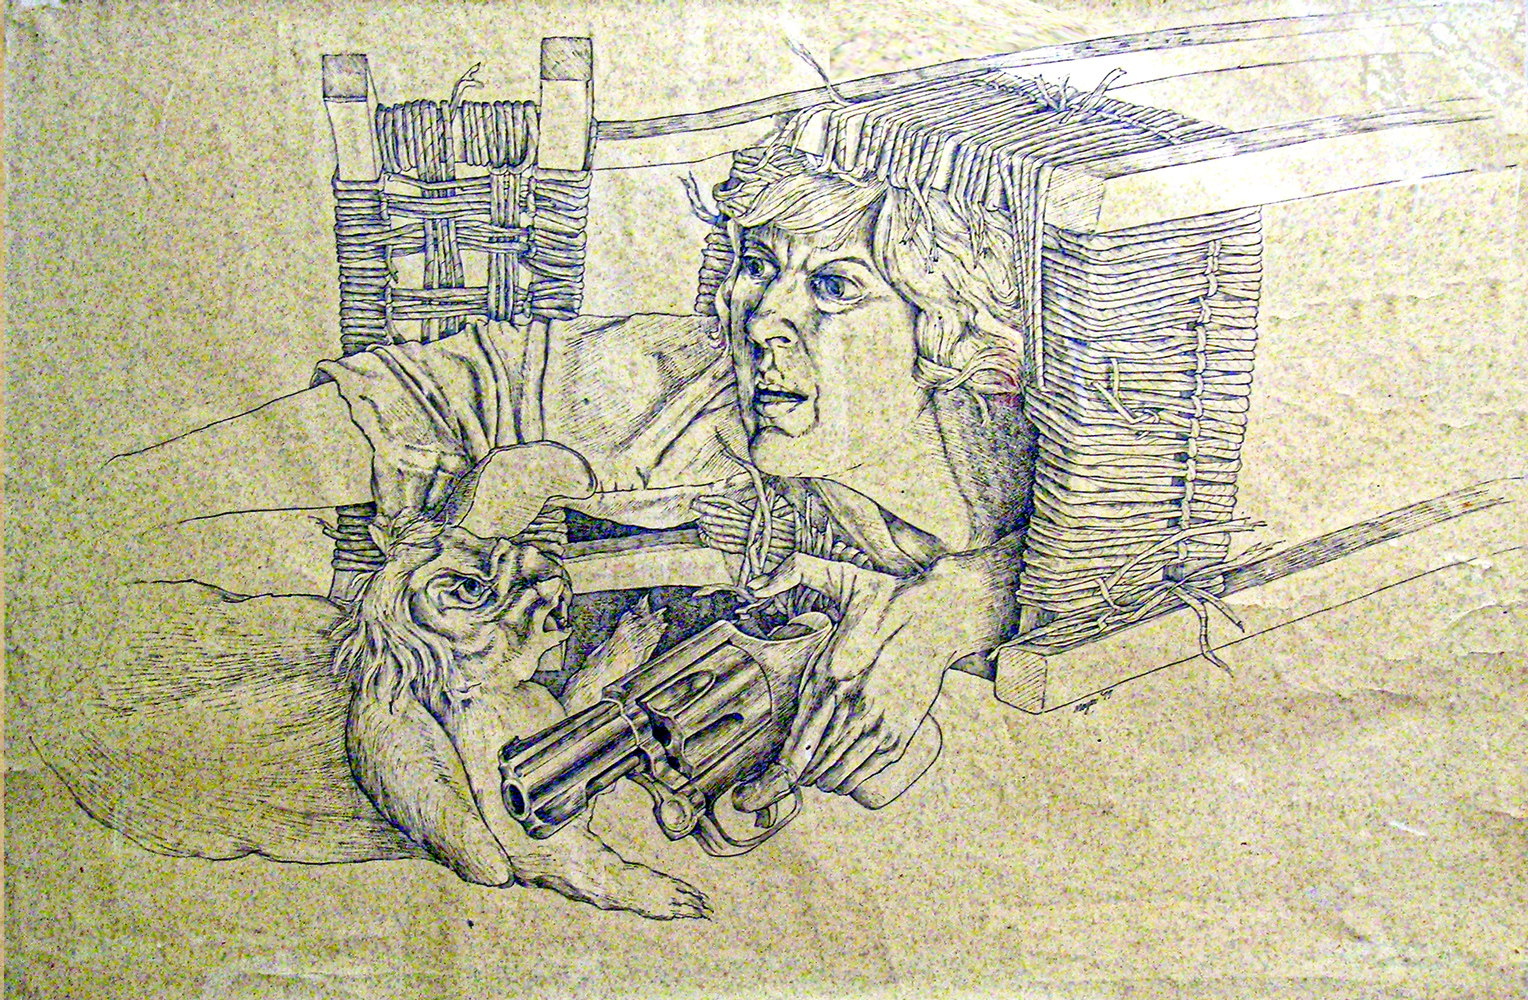 Angry Rabbit informs the Chair Spirit
<span>Ink on HMP mold-made paper<br>
32”x 45”
</span>